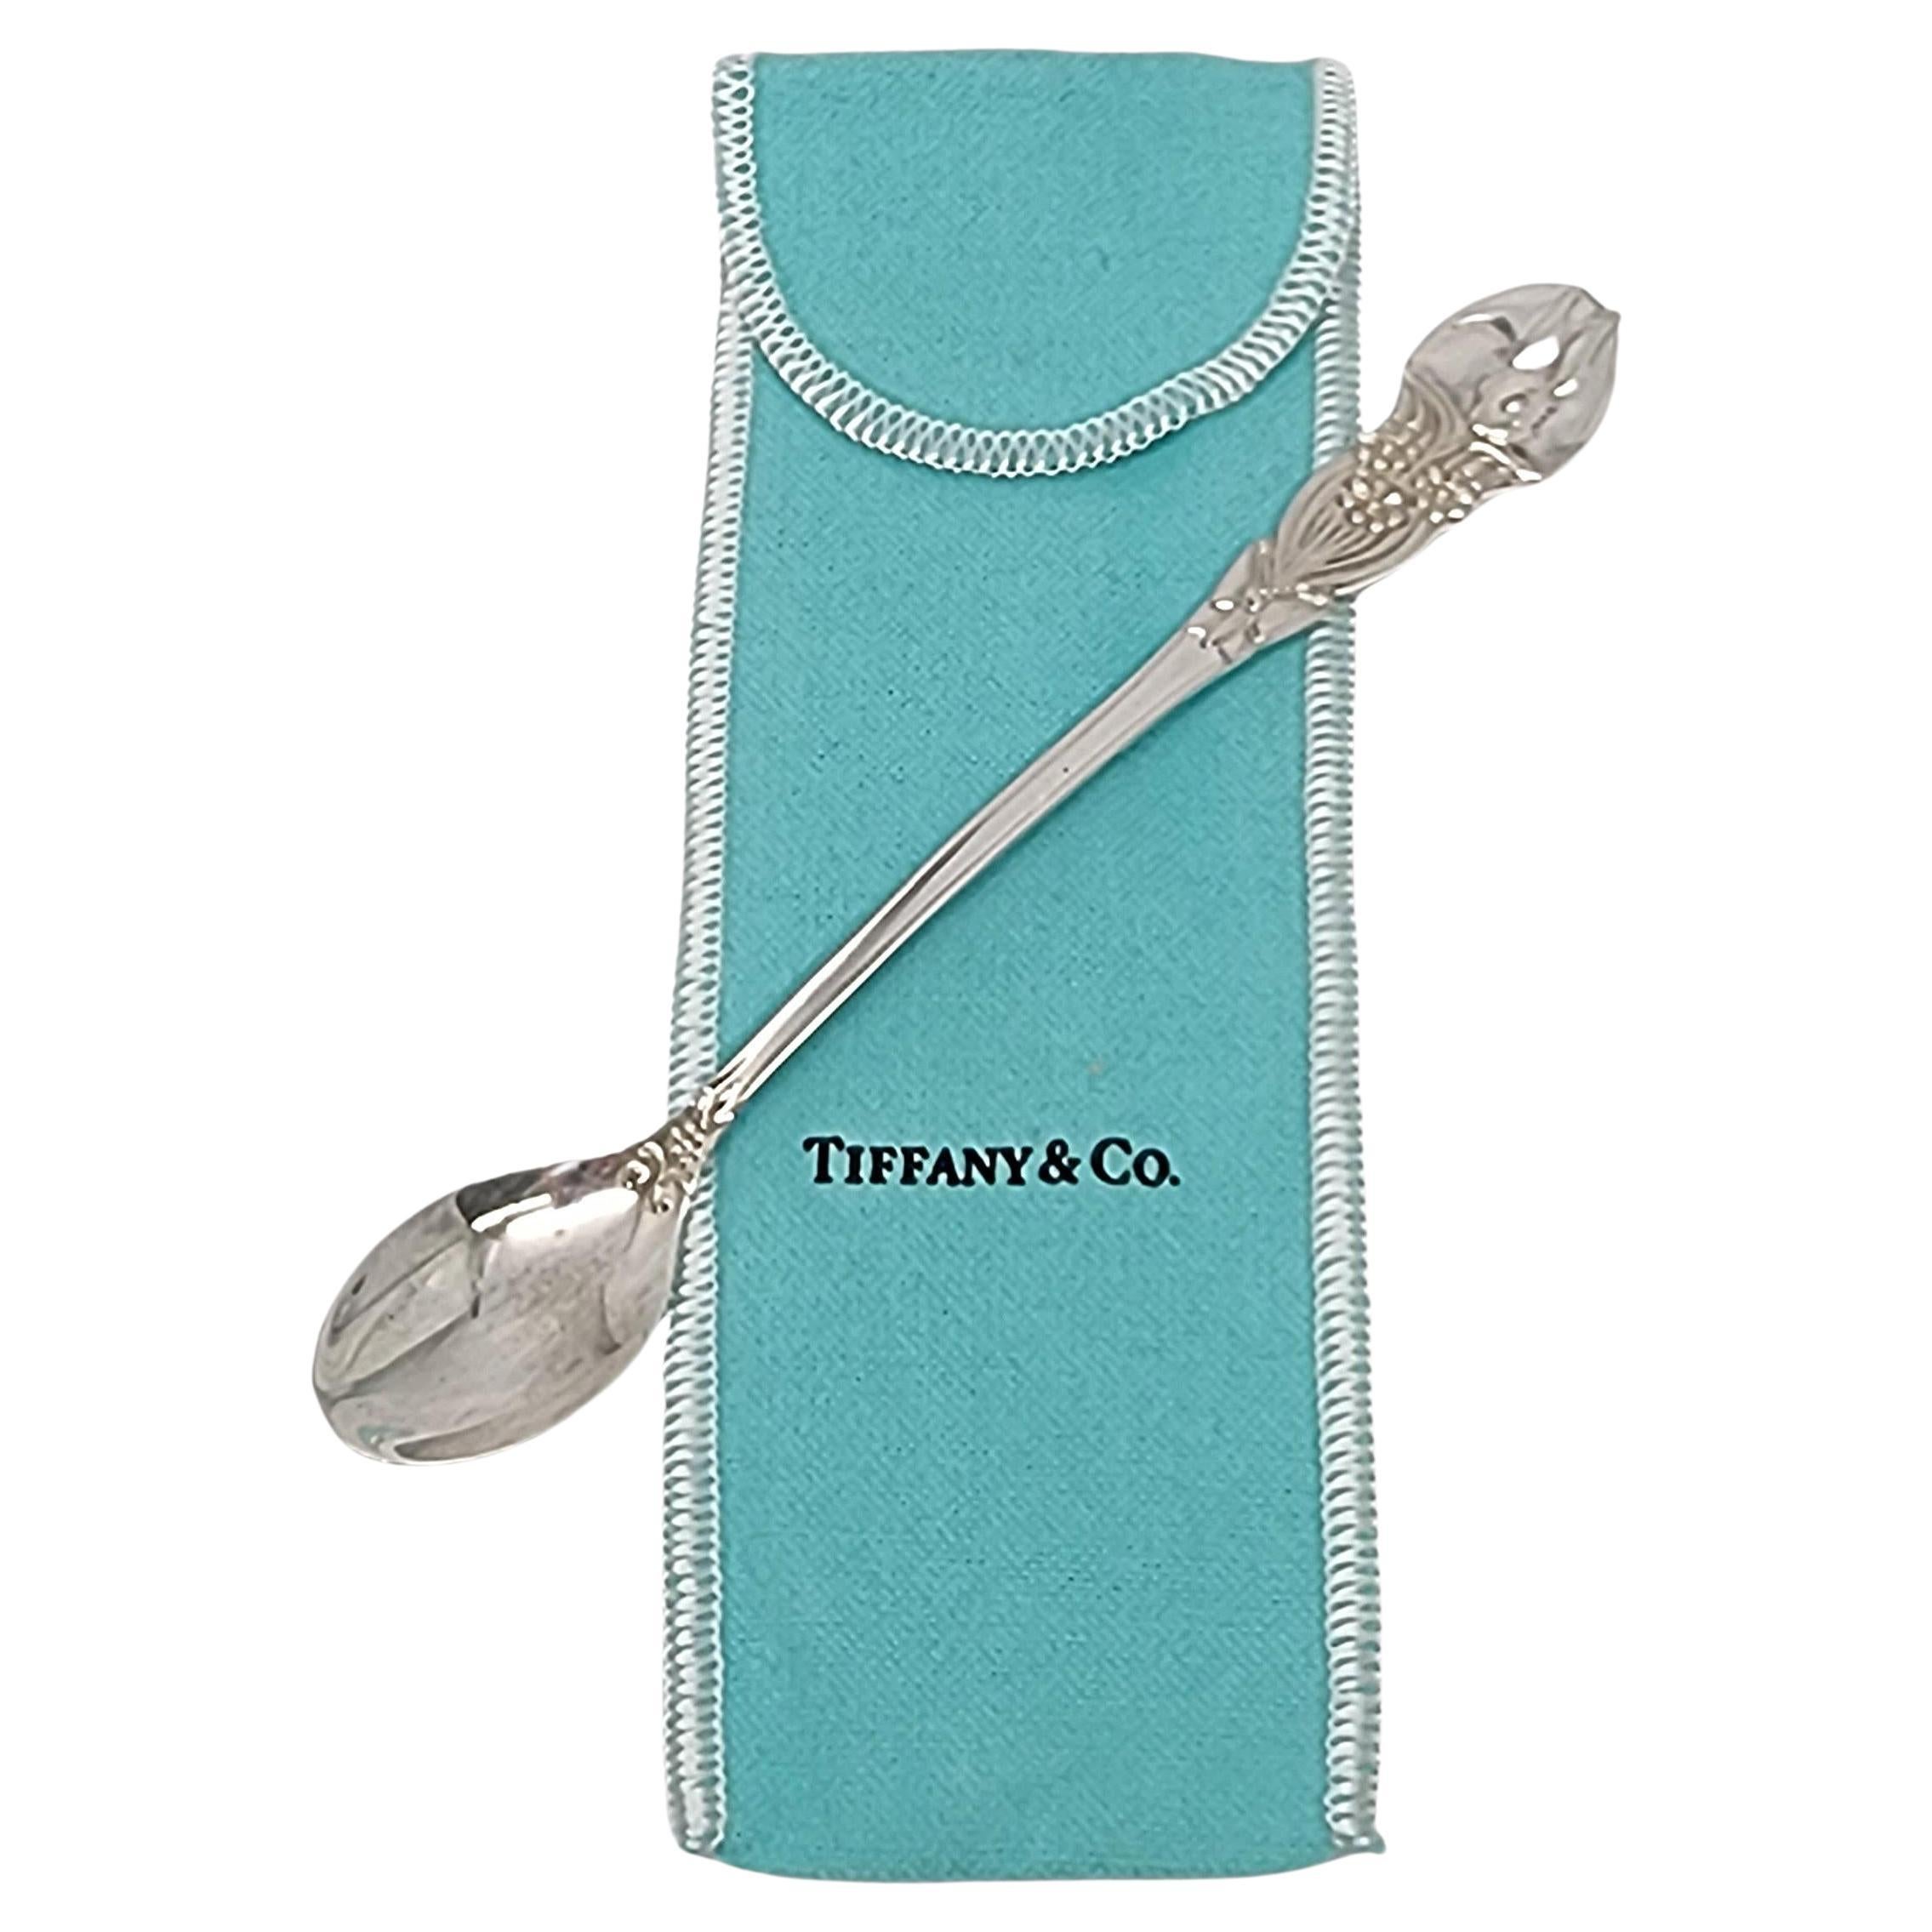 Tiffany & Co Sterling Silver Meadows Bunny Rabbit Baby Spoon with Pouch #16858 For Sale